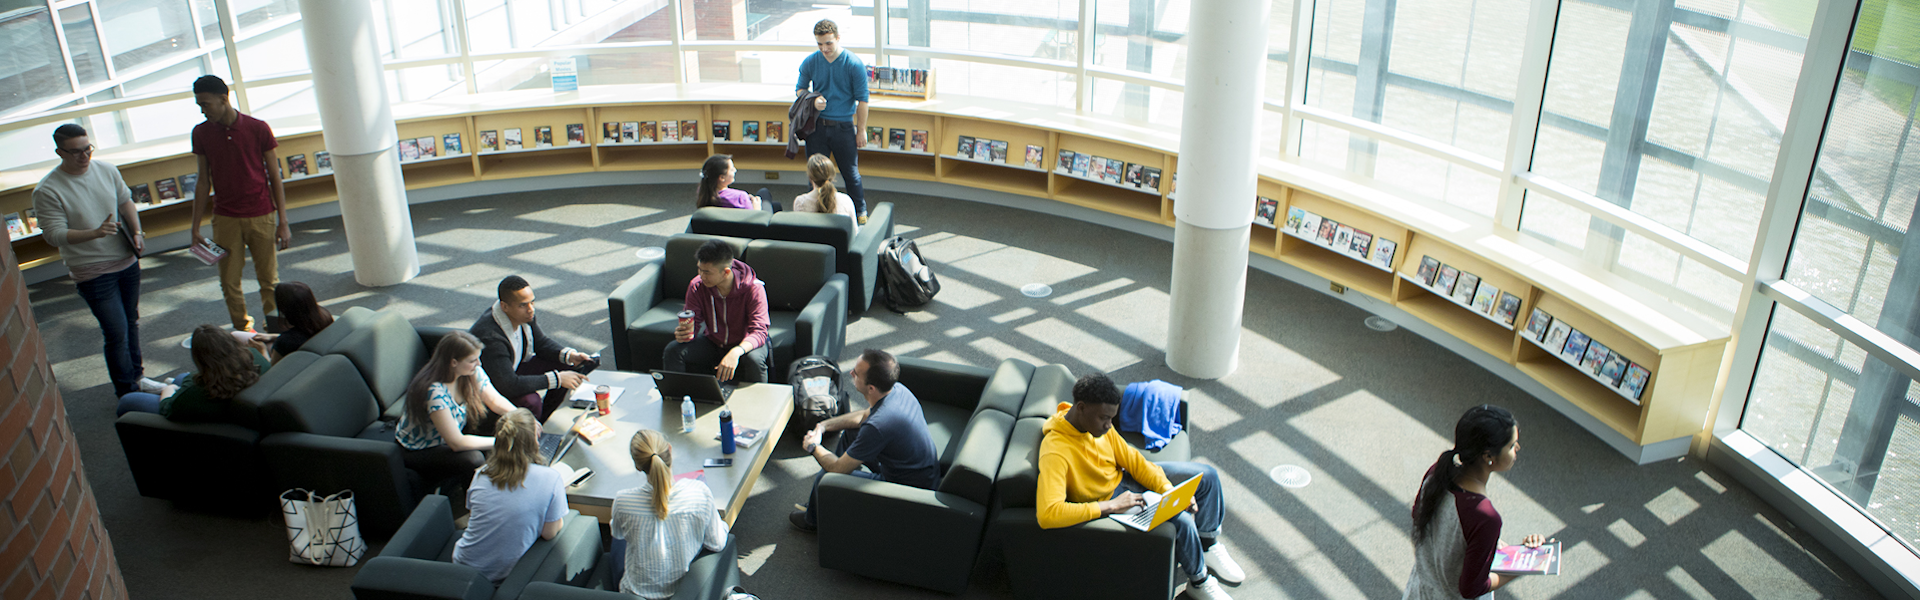 Bird eye image of students studying in the library.